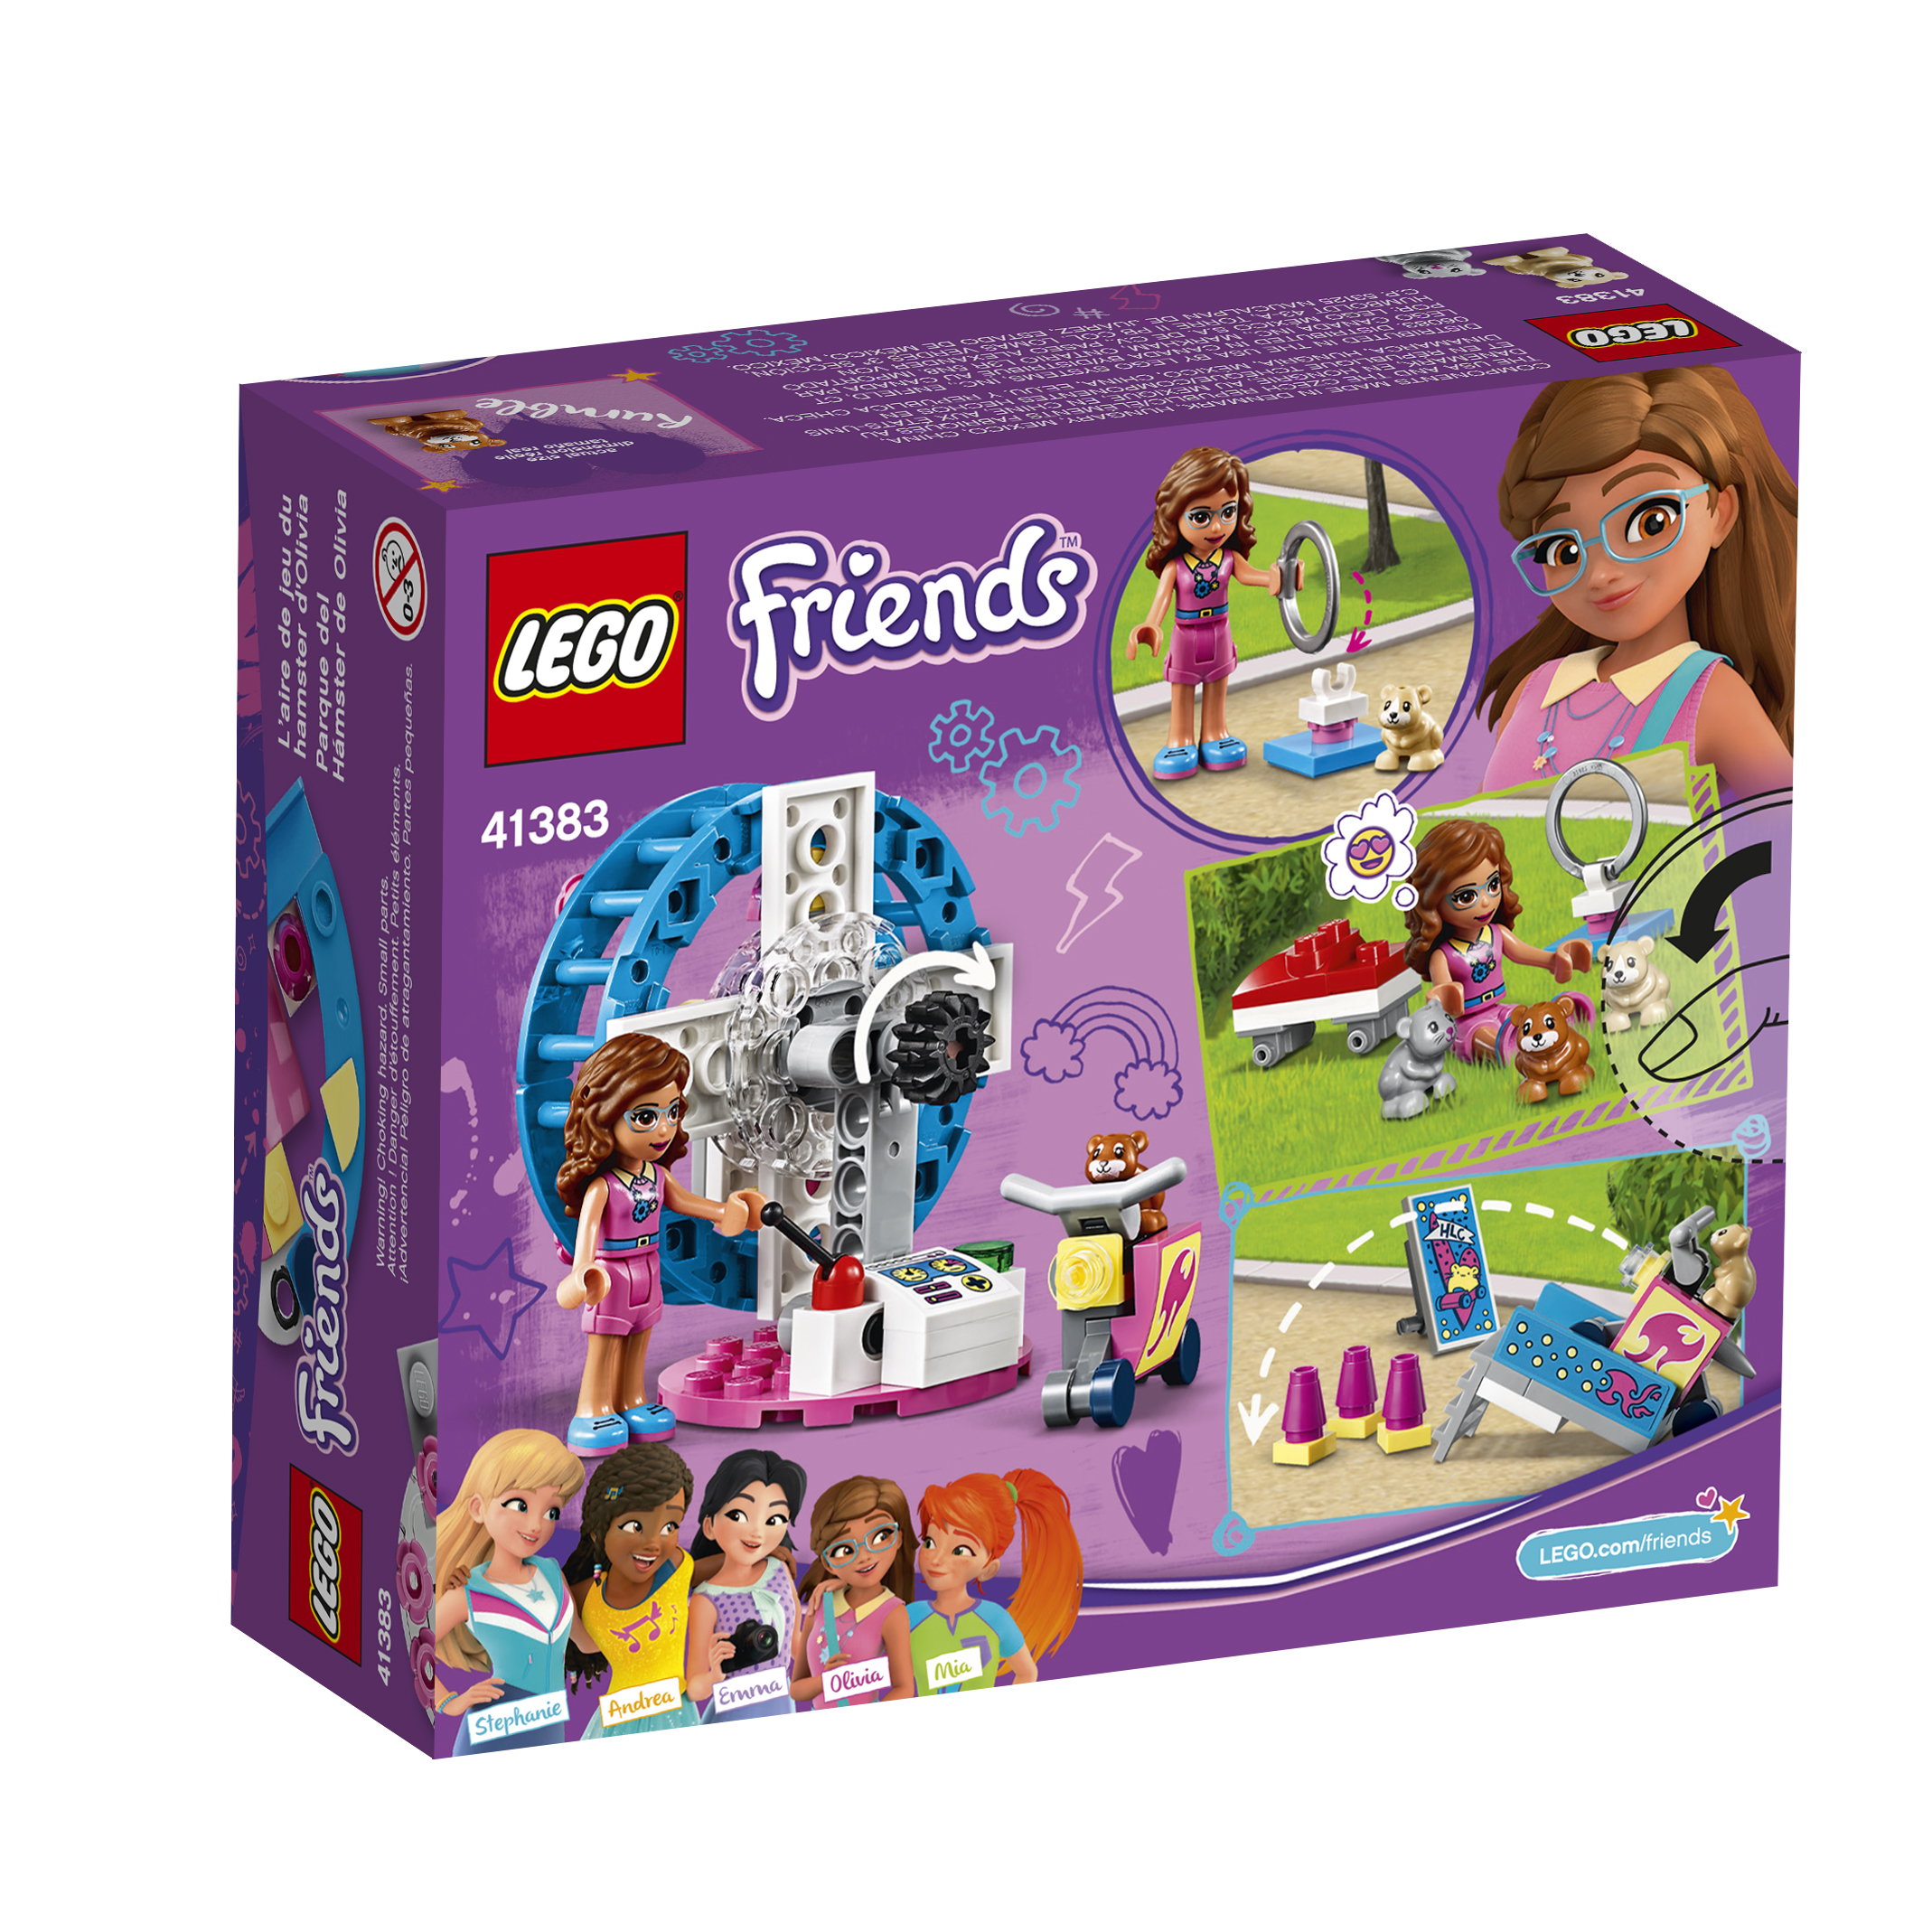 LEGO Friends Olivia's Hamster Playground 41383 9 (81 Pieces) - image 6 of 8